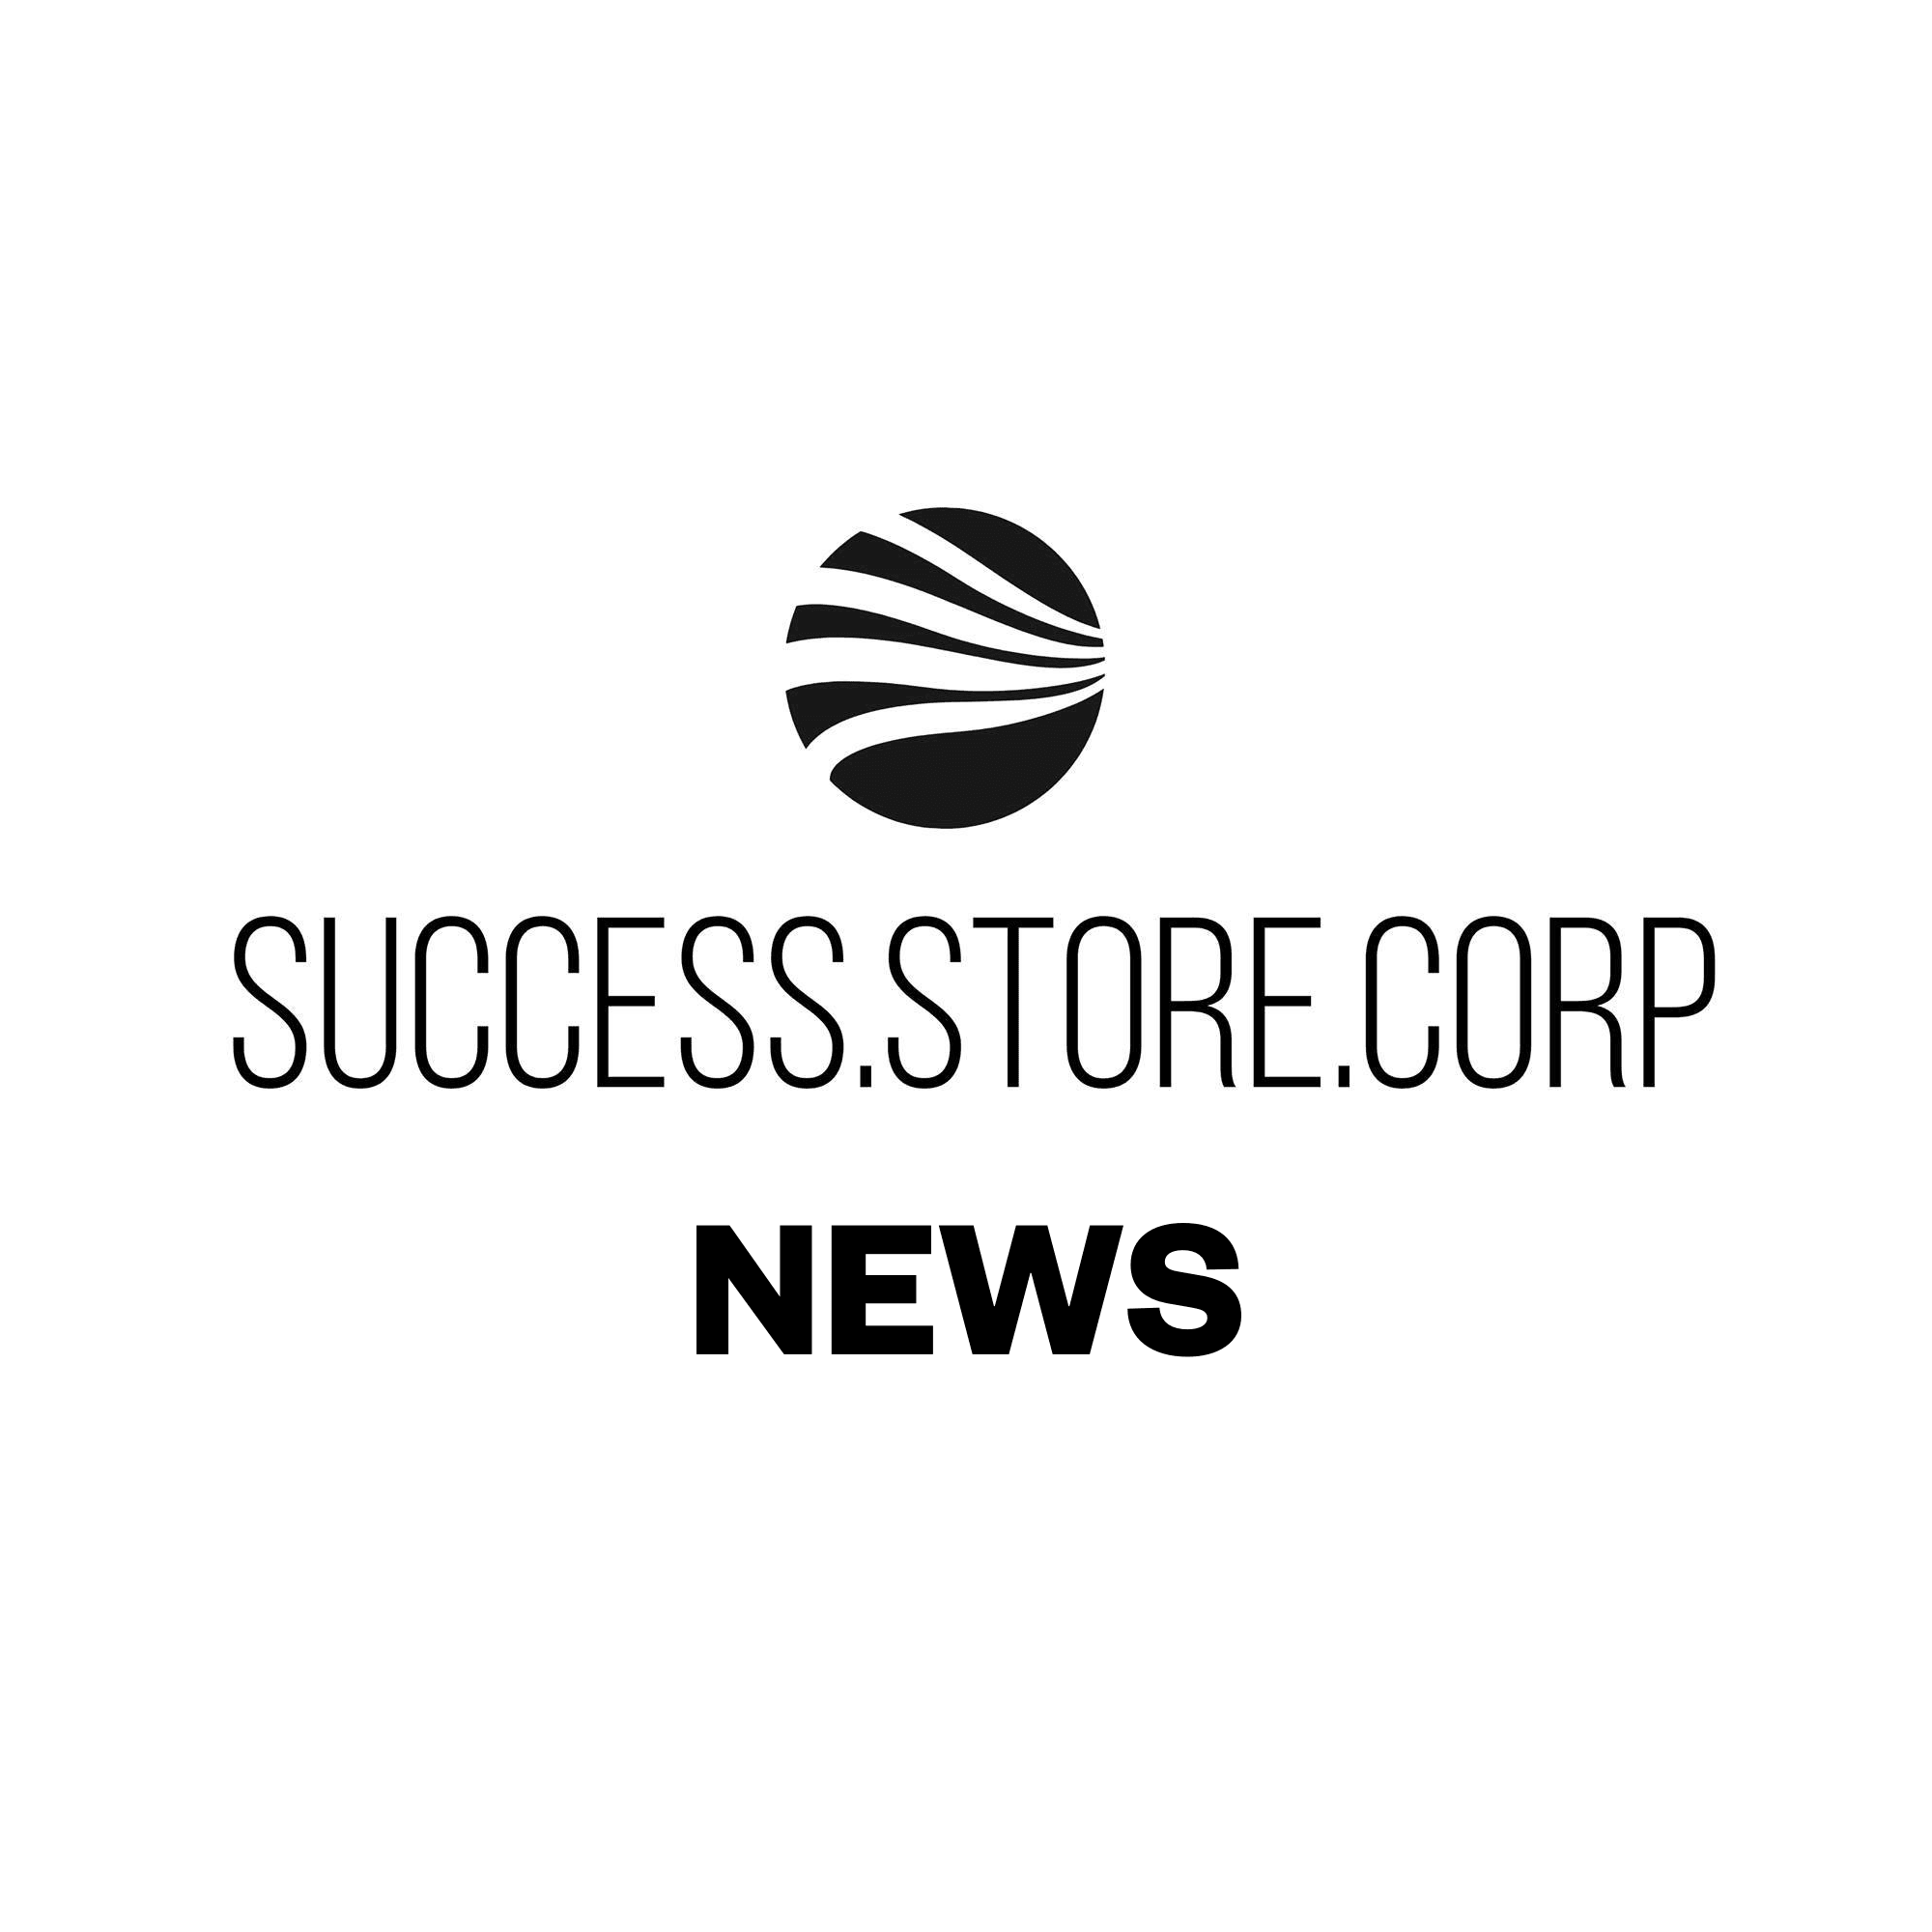 News From Success.Store.Corp